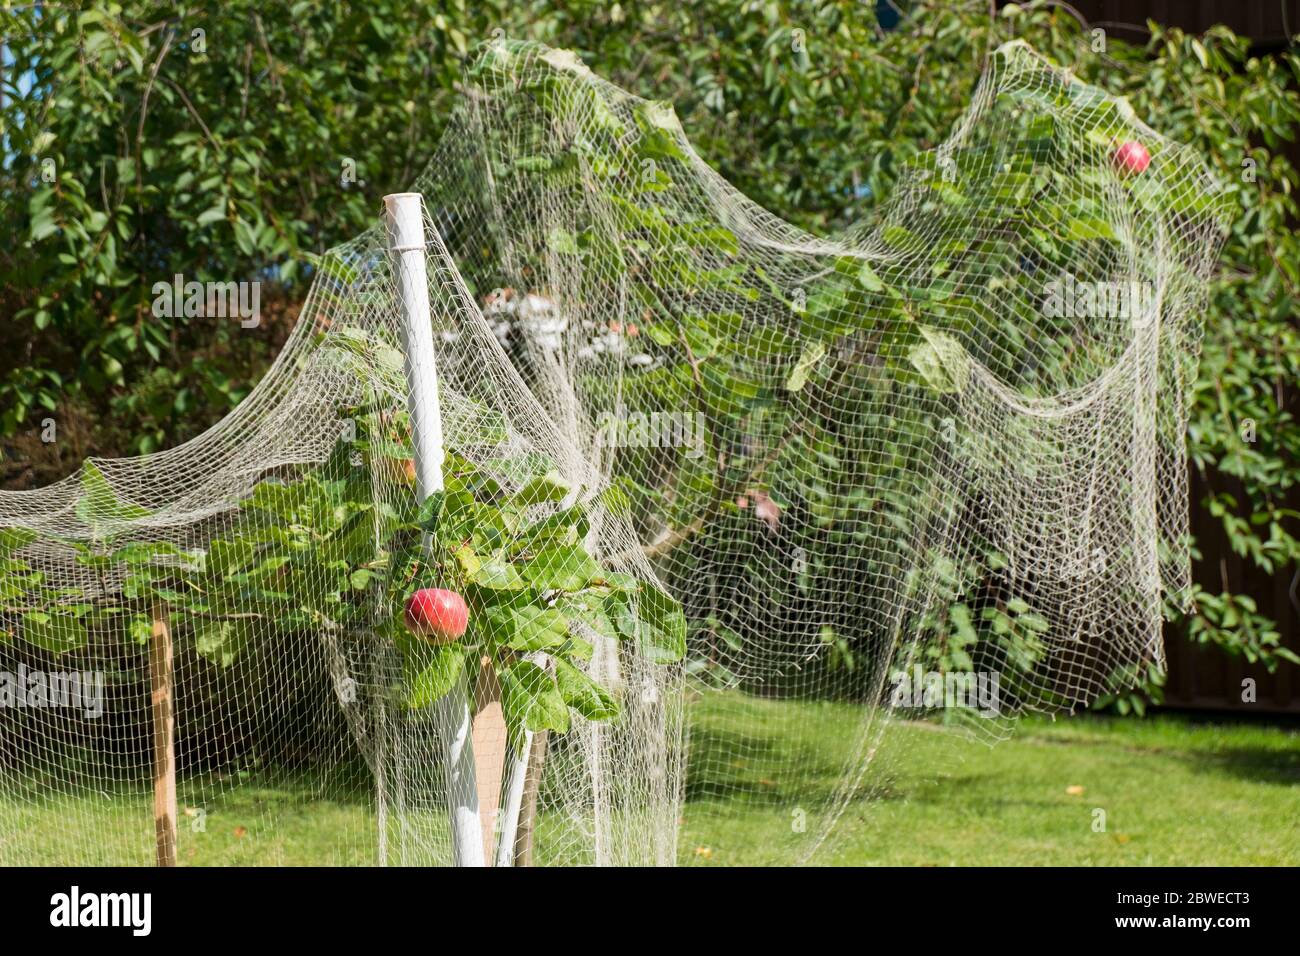 White netting covers a fruit, apple tree from insects, bugs, pests